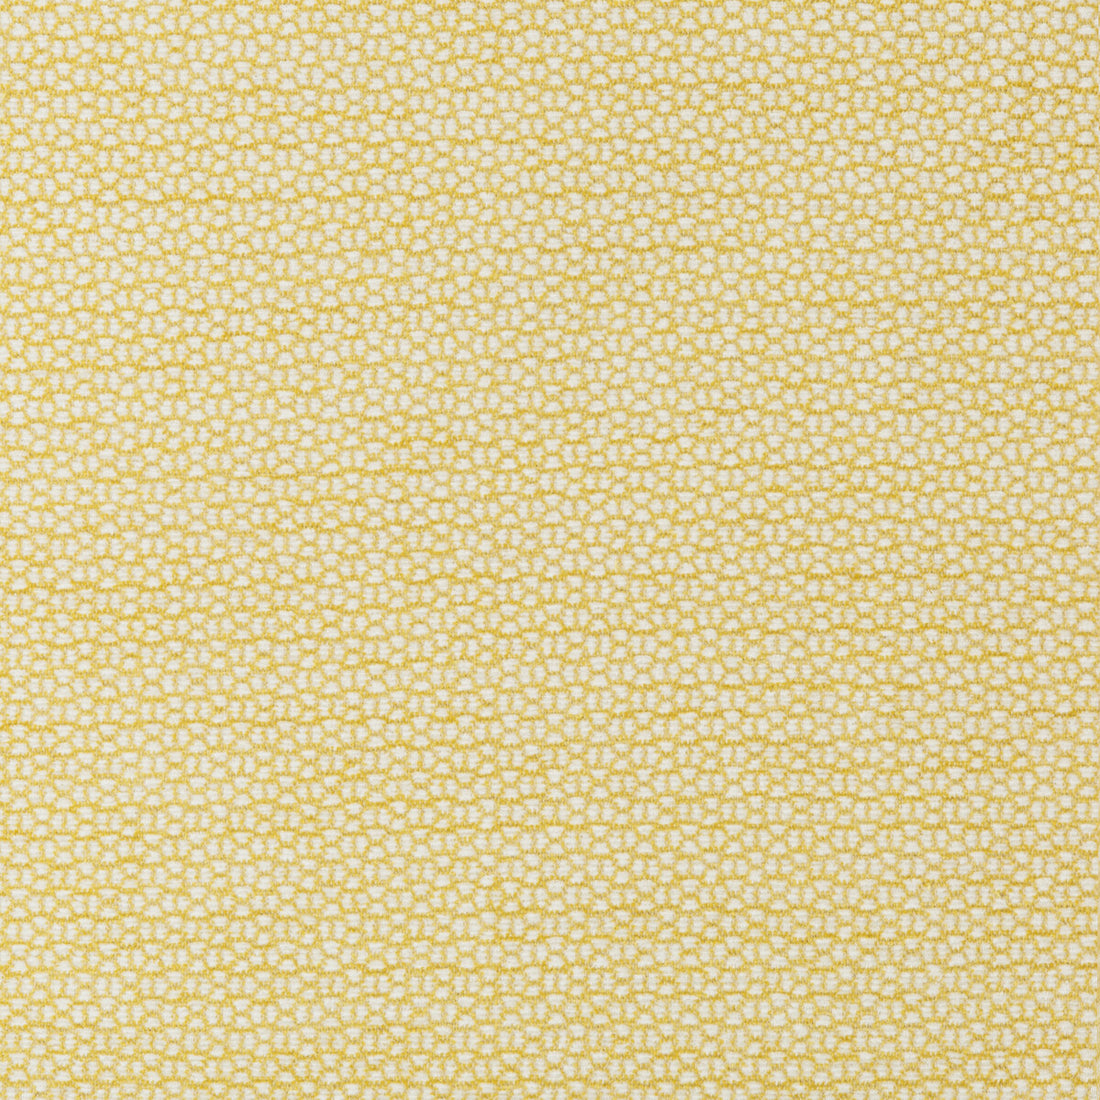 Marolay Texture fabric in canary color - pattern 8019144.4.0 - by Brunschwig &amp; Fils in the Chambery Textures II collection